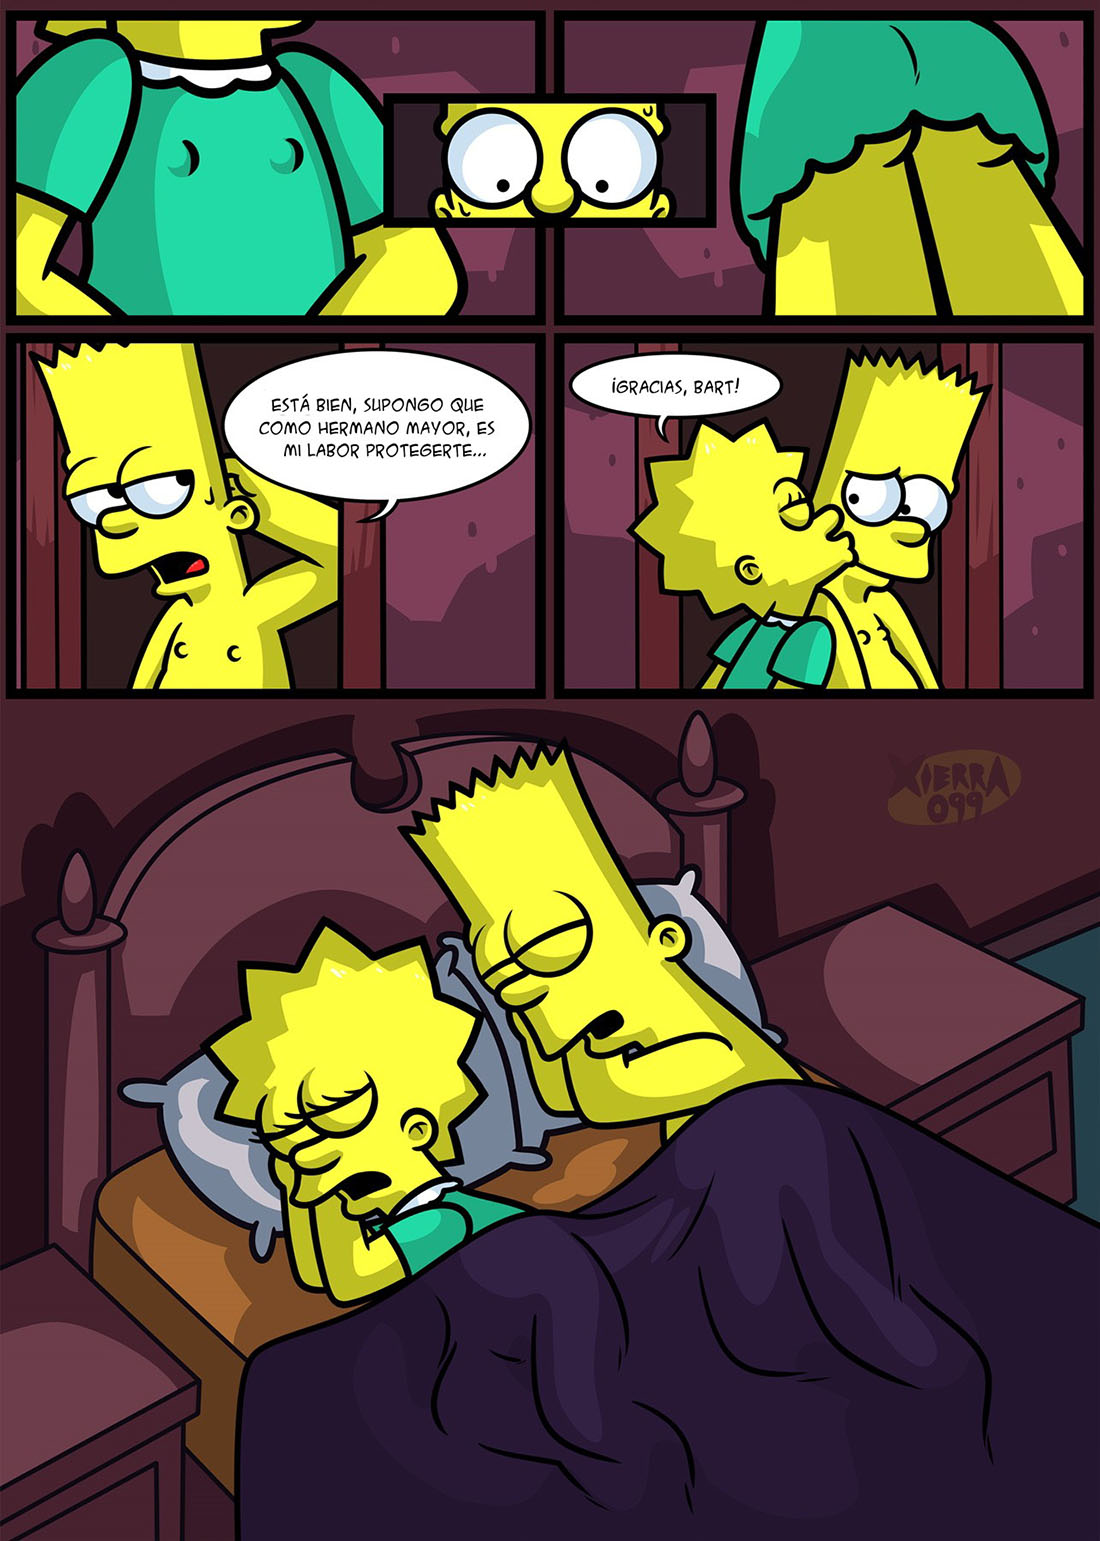 The not so TREEHOUSE of Horror